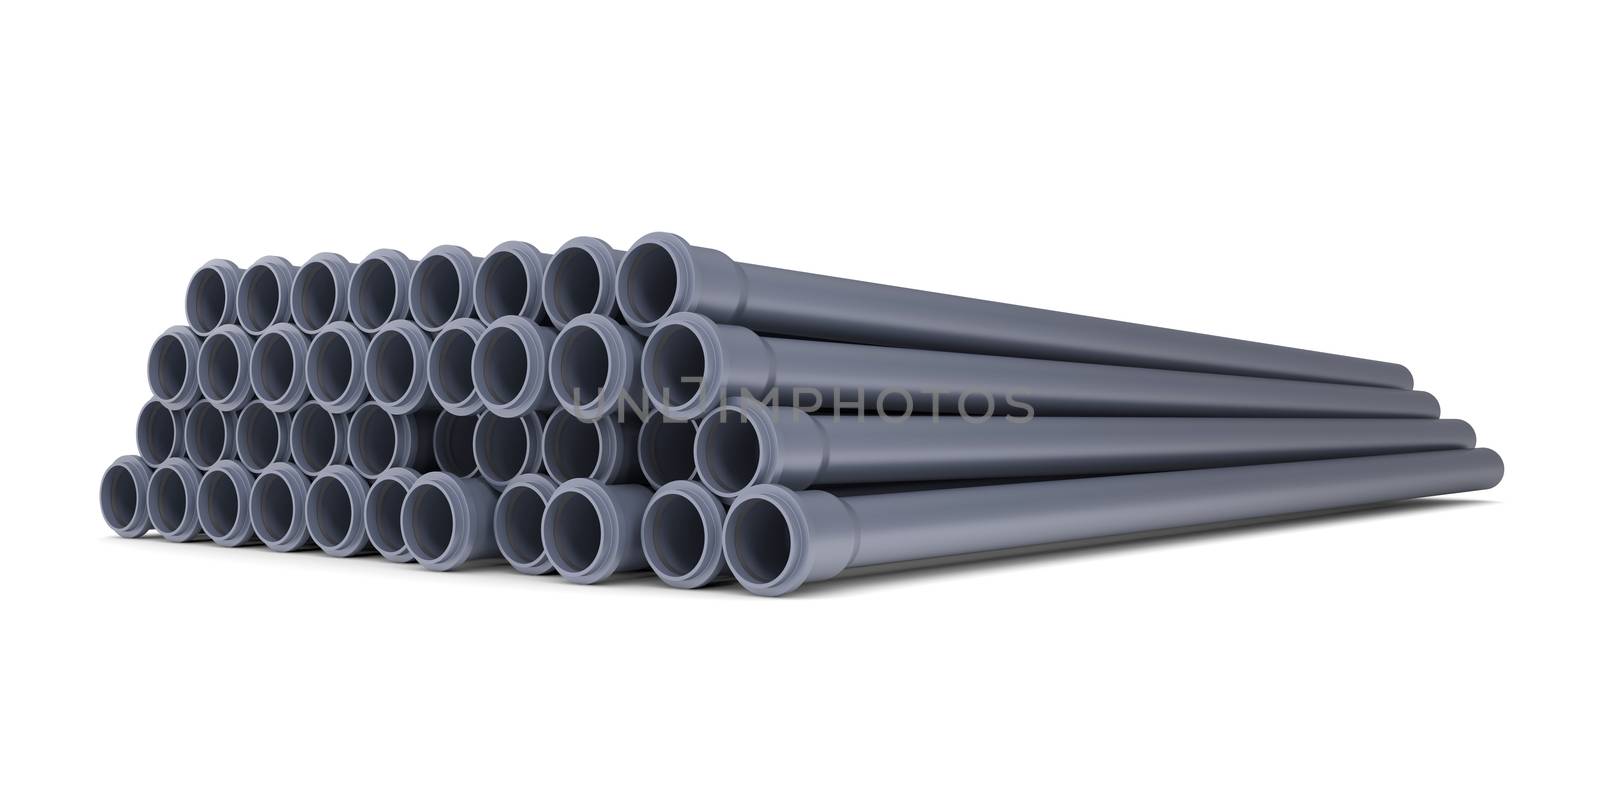 Grey PVC sewer pipes by cherezoff